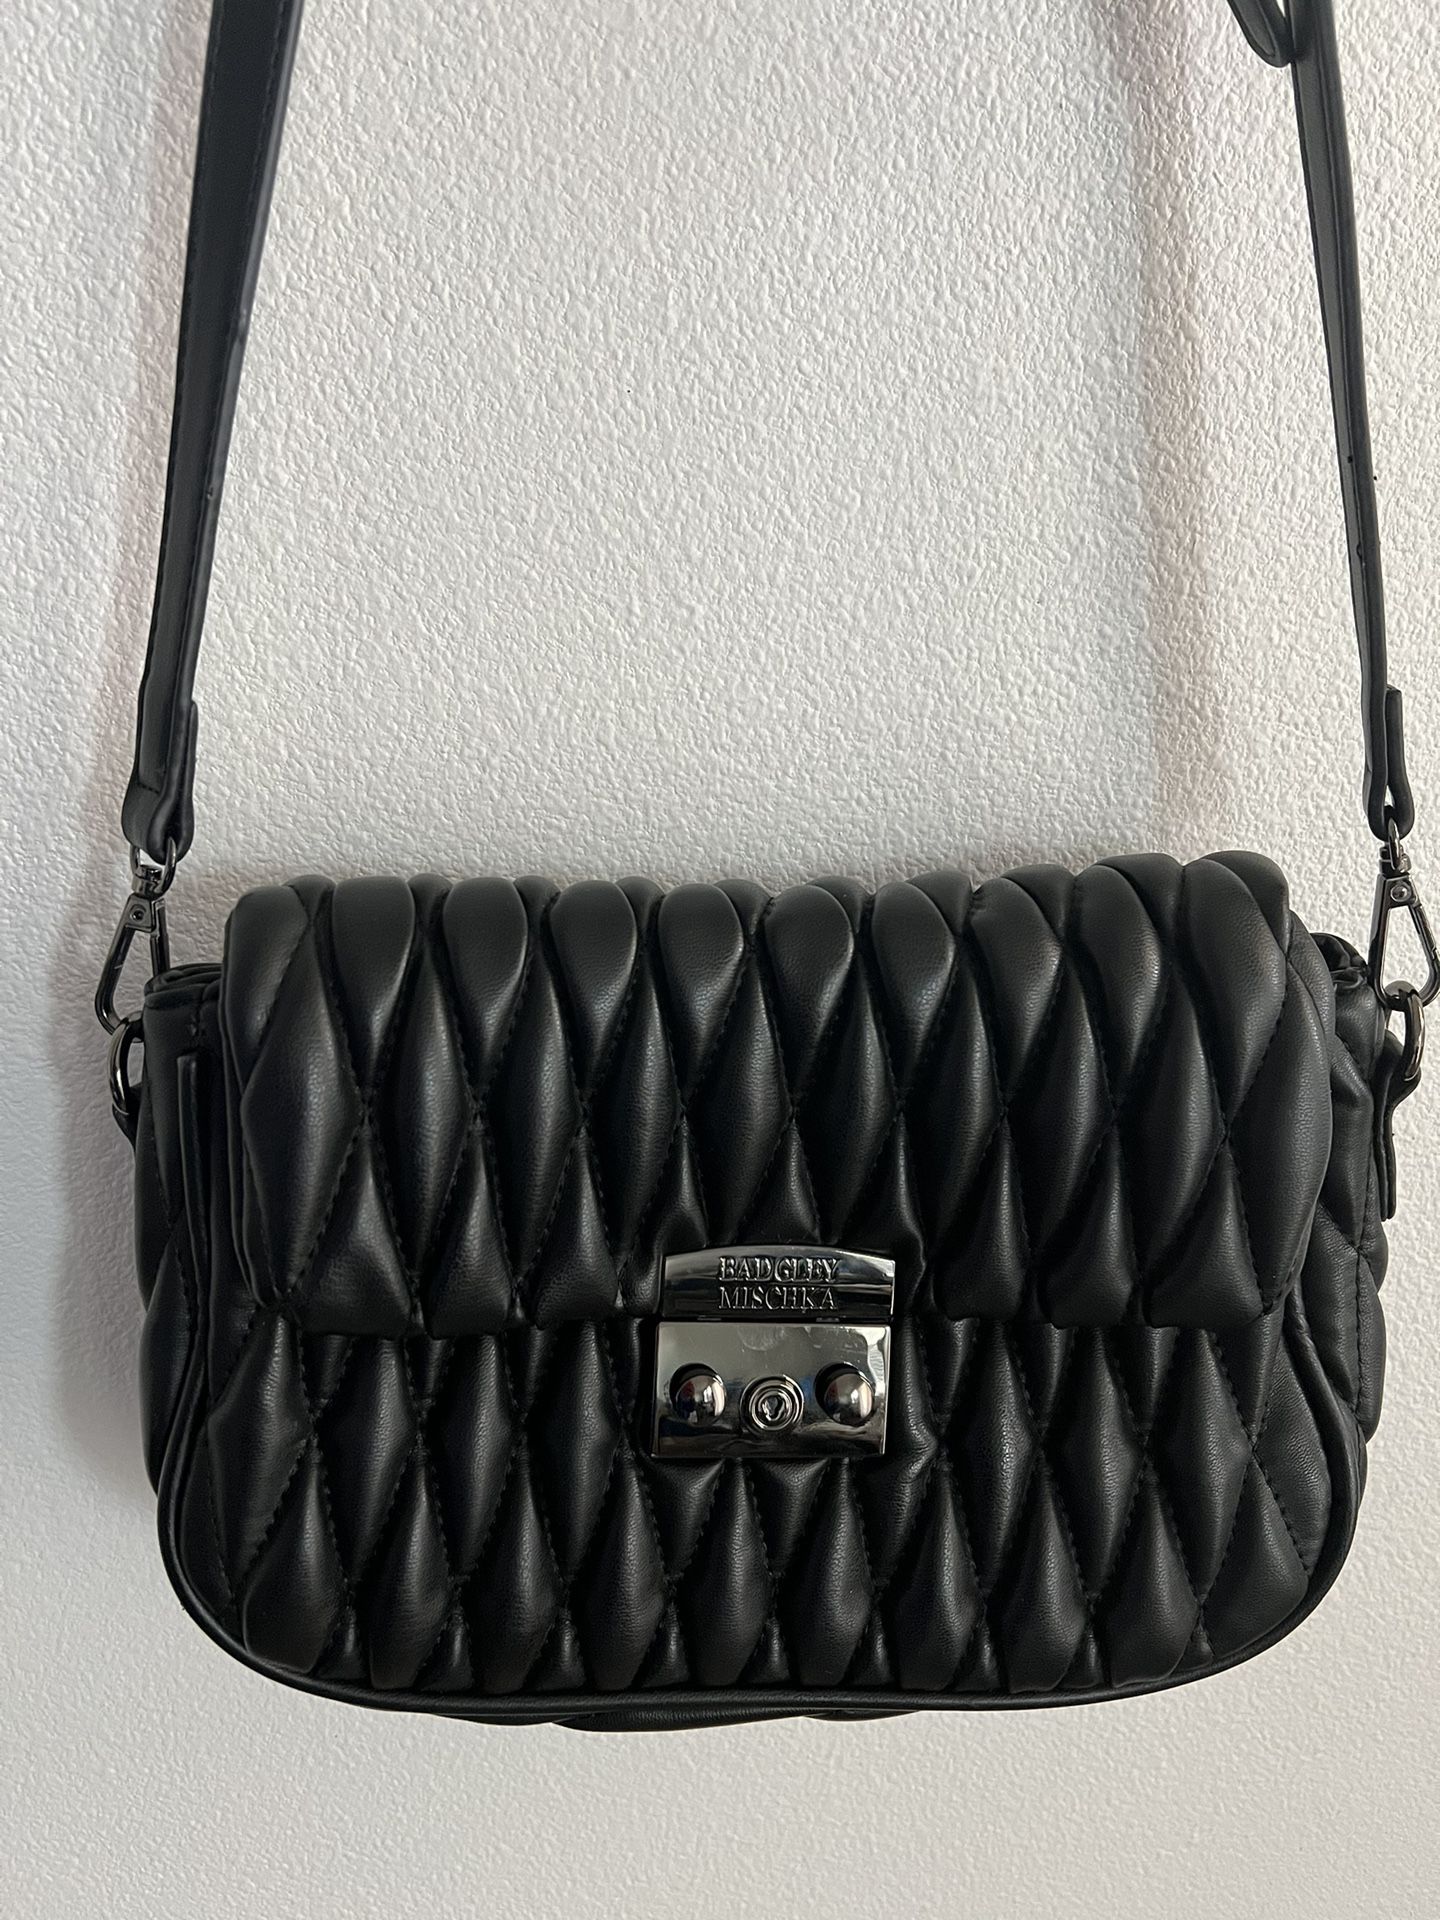 BADGLEY MISCHKA Black Quilted VEGAN Faux Leather Womens Crossbody Bag  $40 OBO